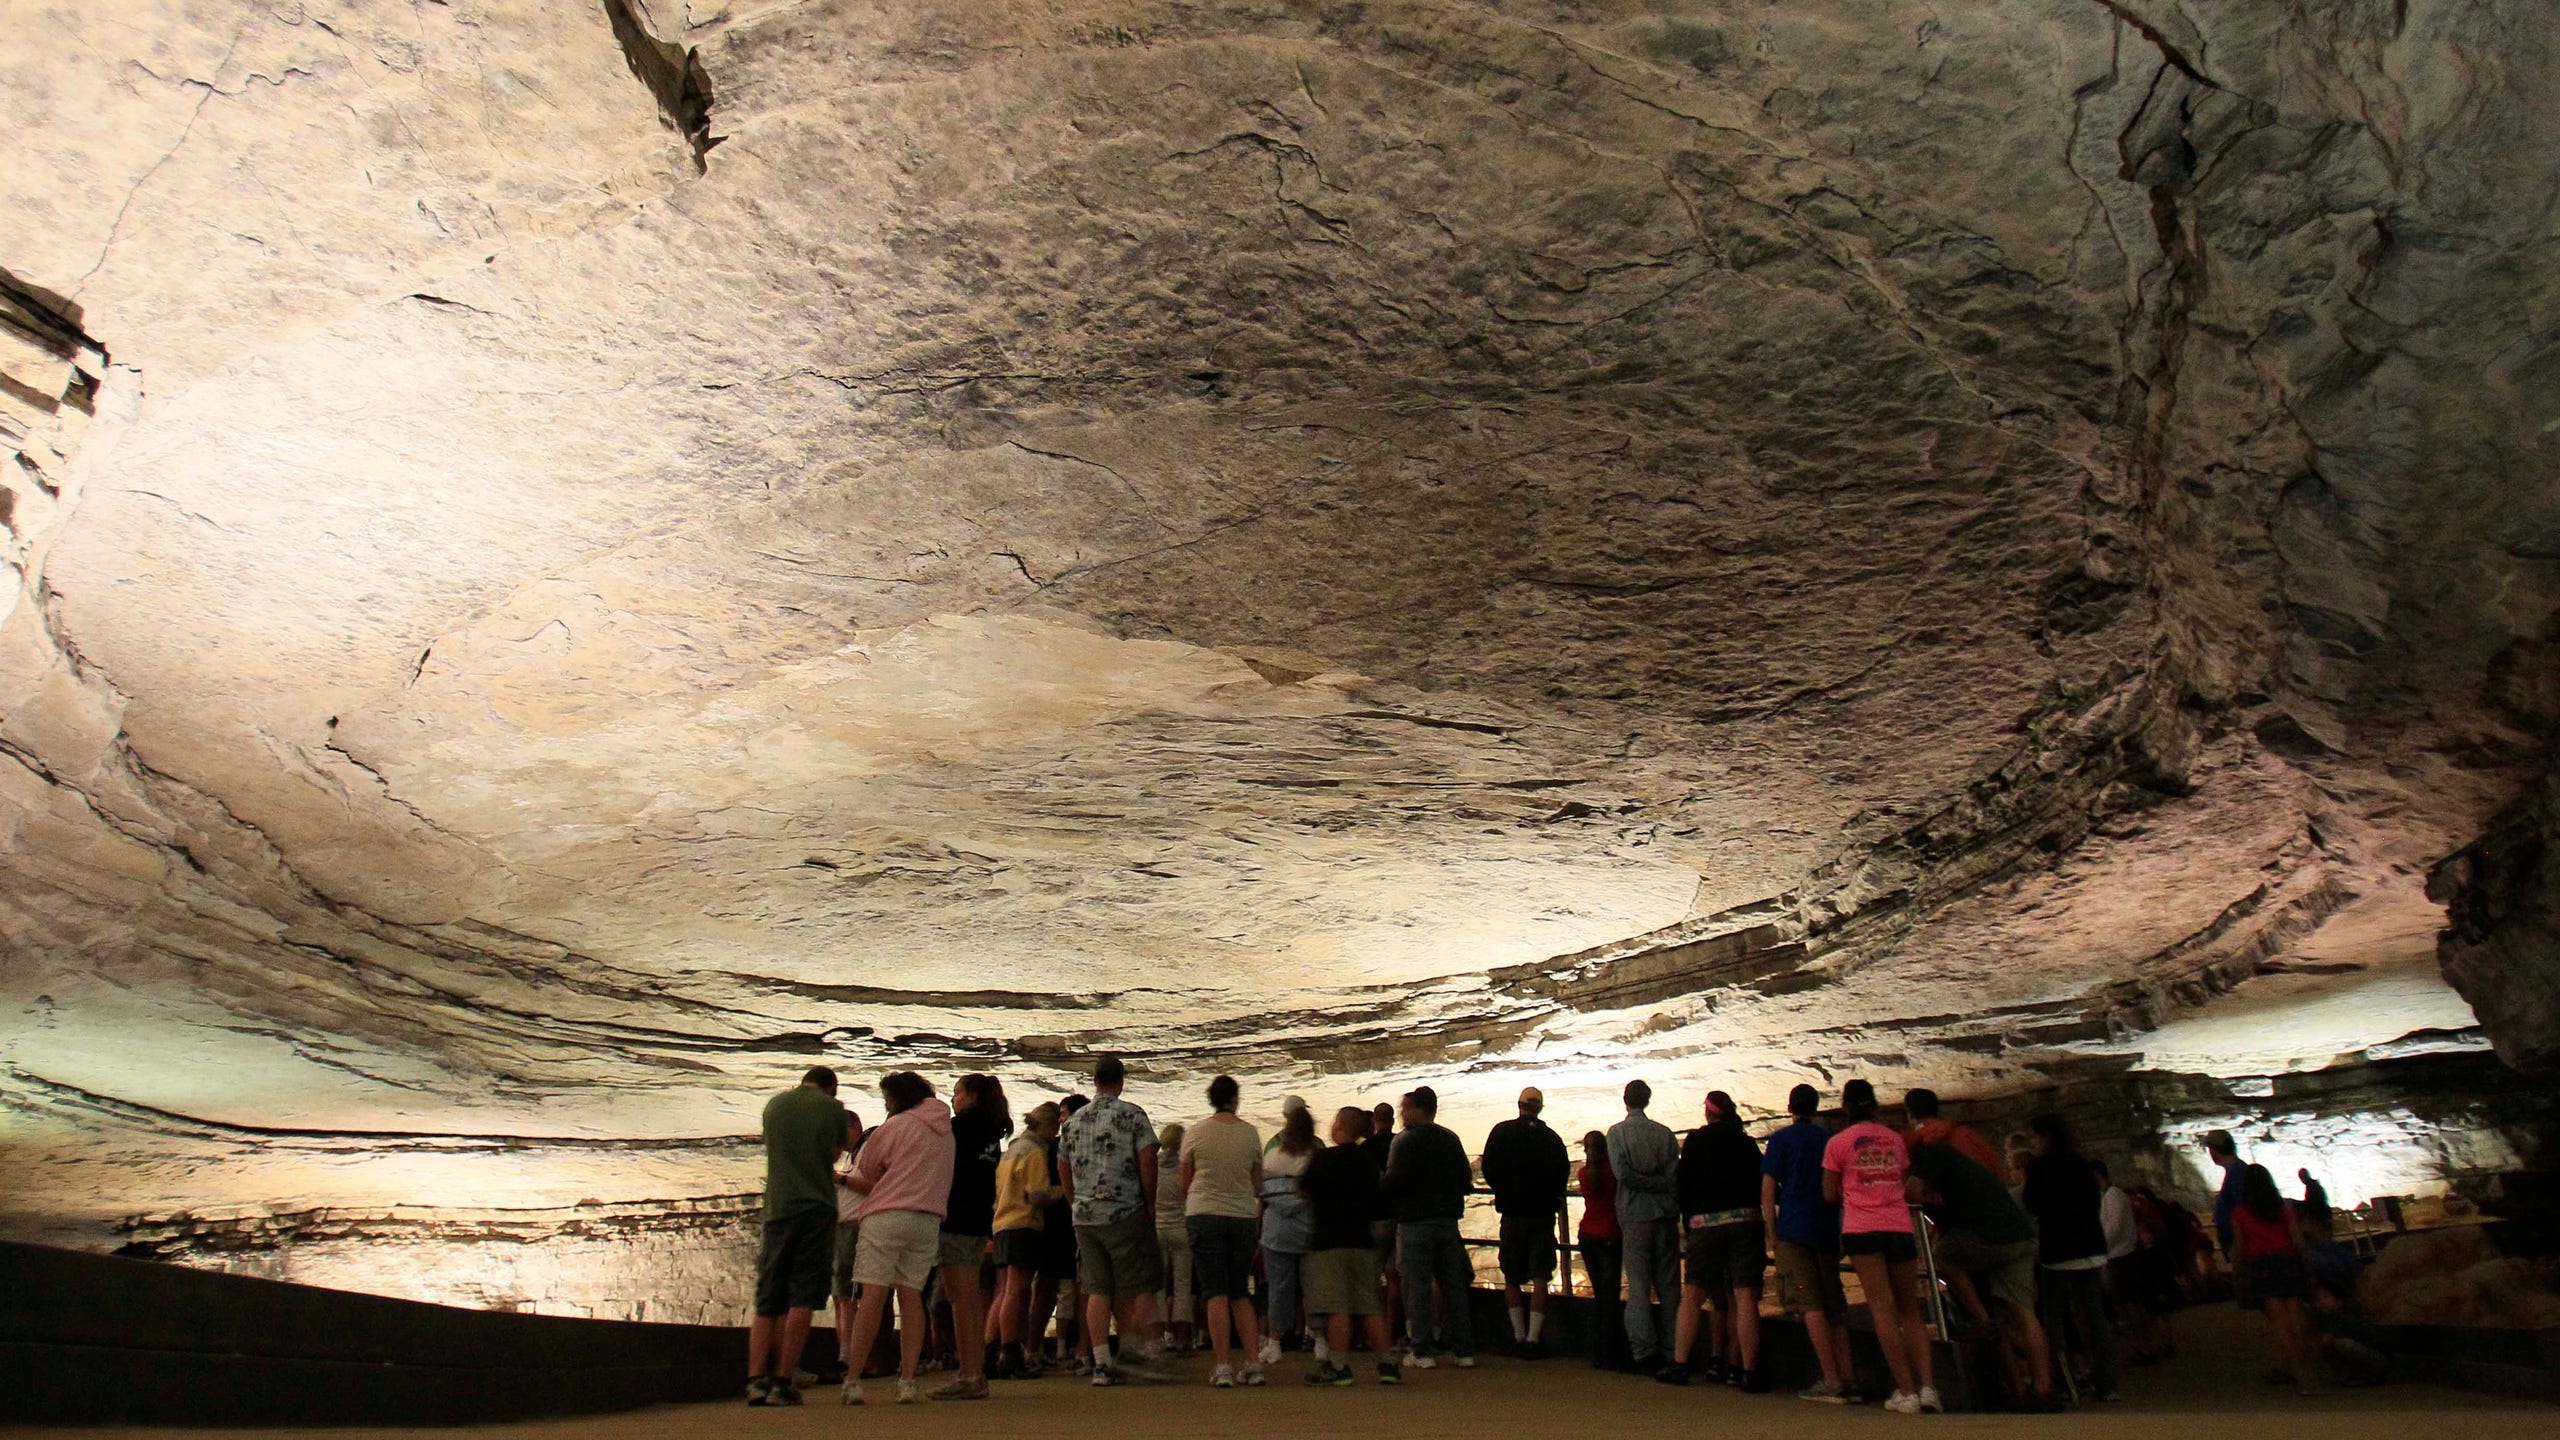 Tour participants marvel at the rotunda area of Mammoth Cave National Park in this file photo from August 2011.